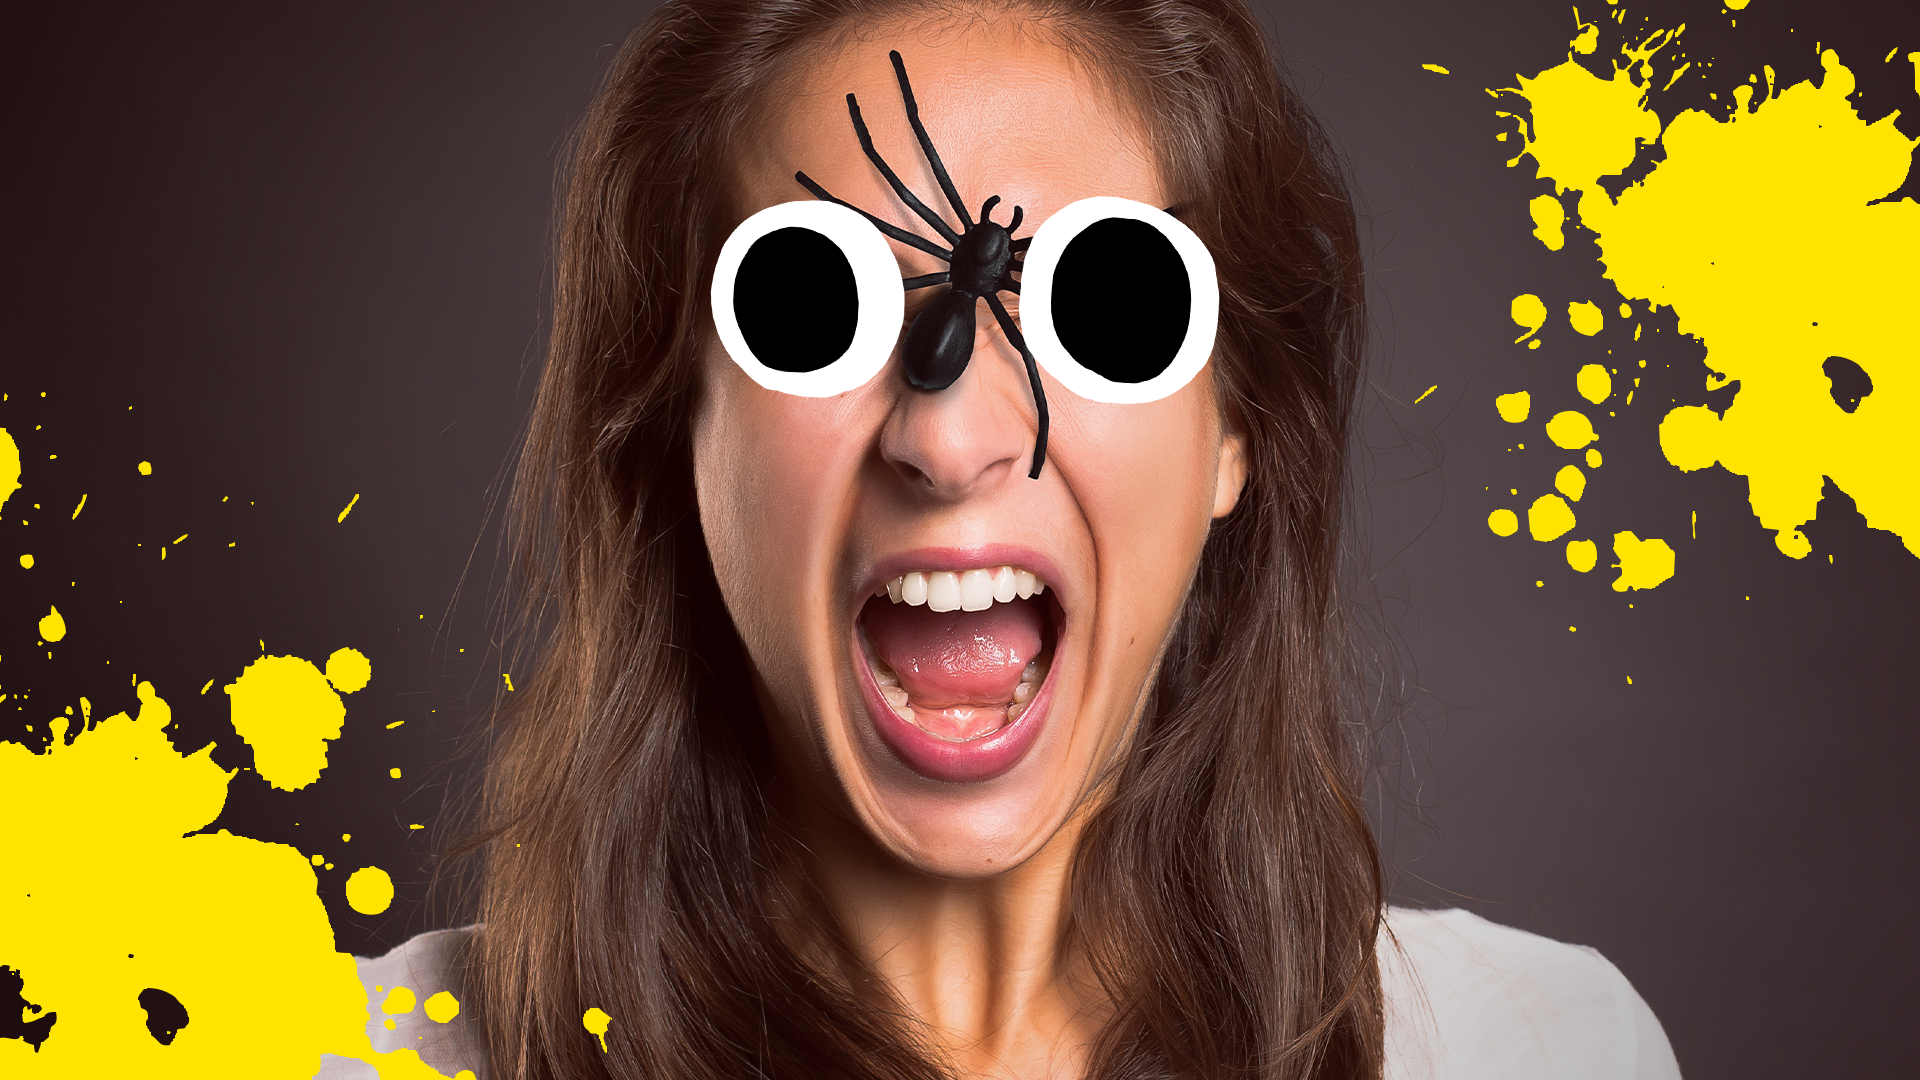 Woman screaming with spider on her face and splats